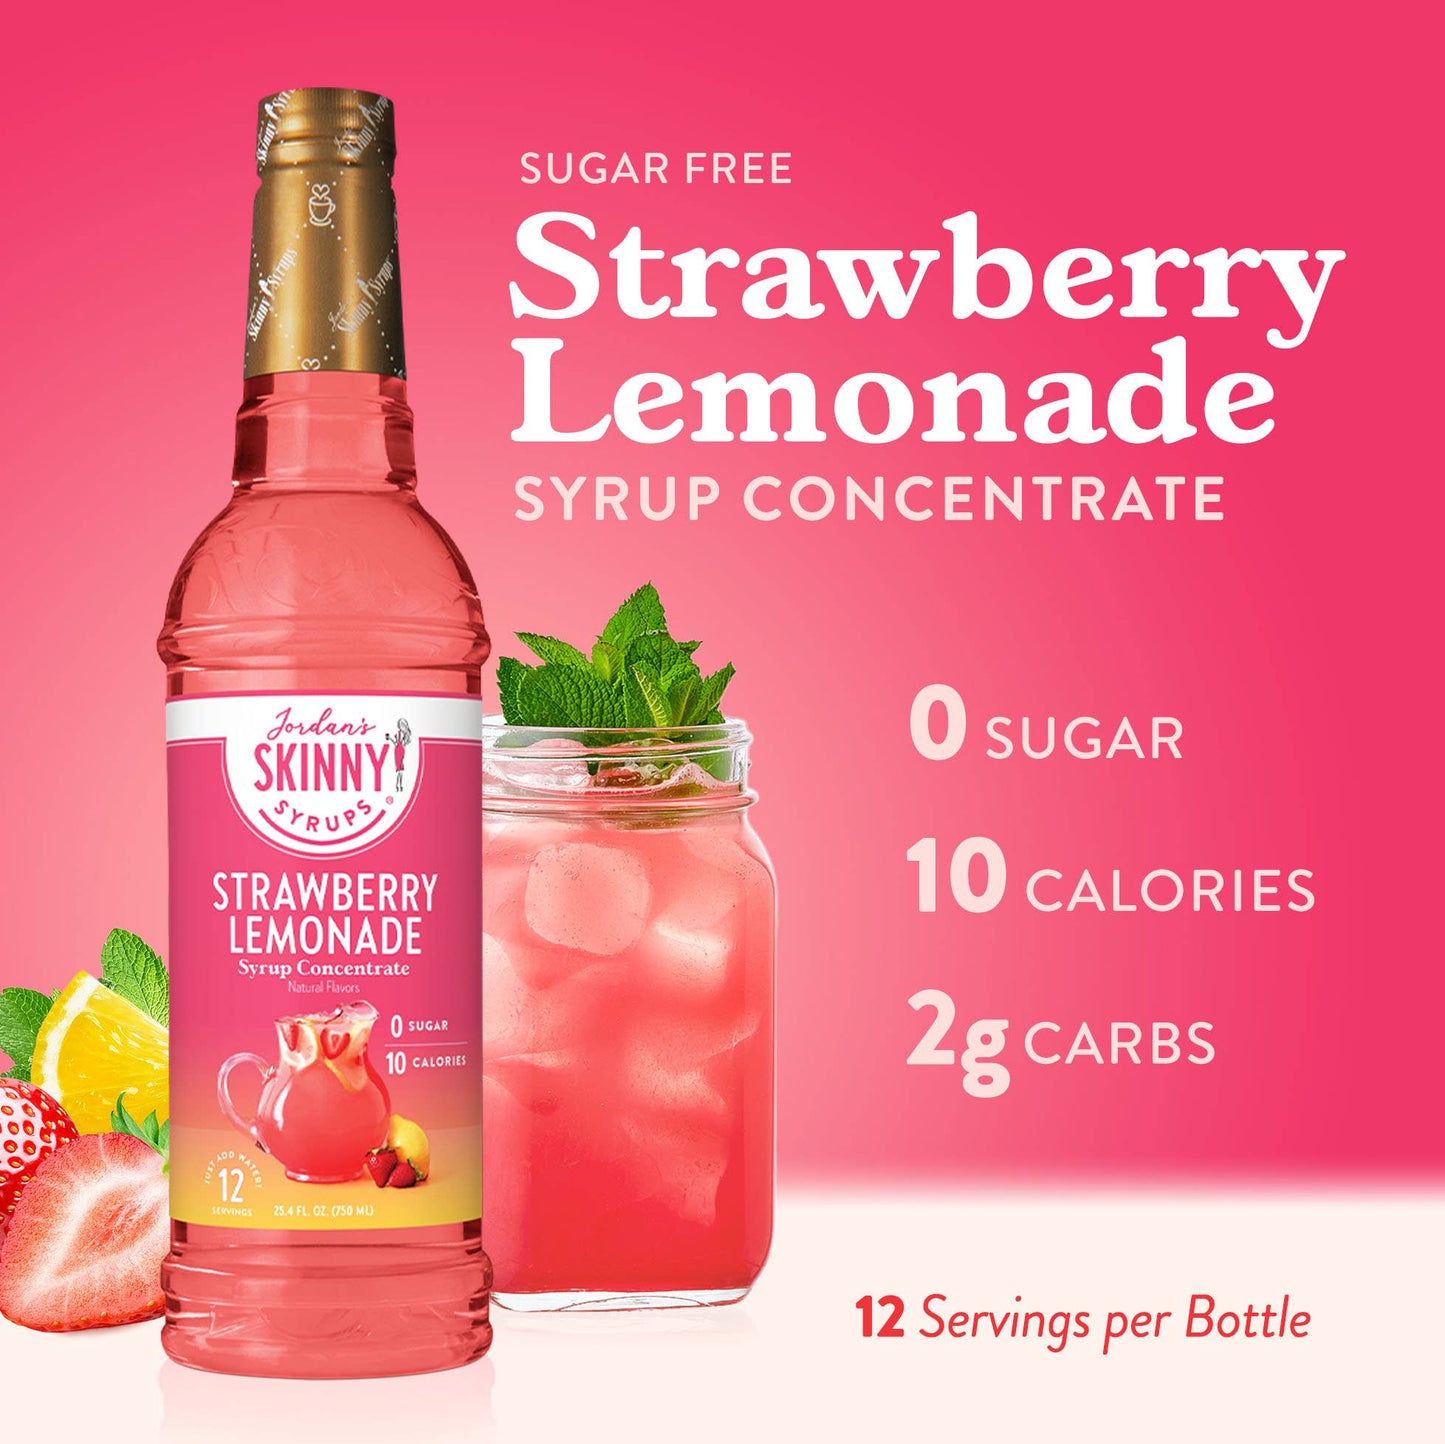 Strawberry Lemonade Syrup Concentrate*